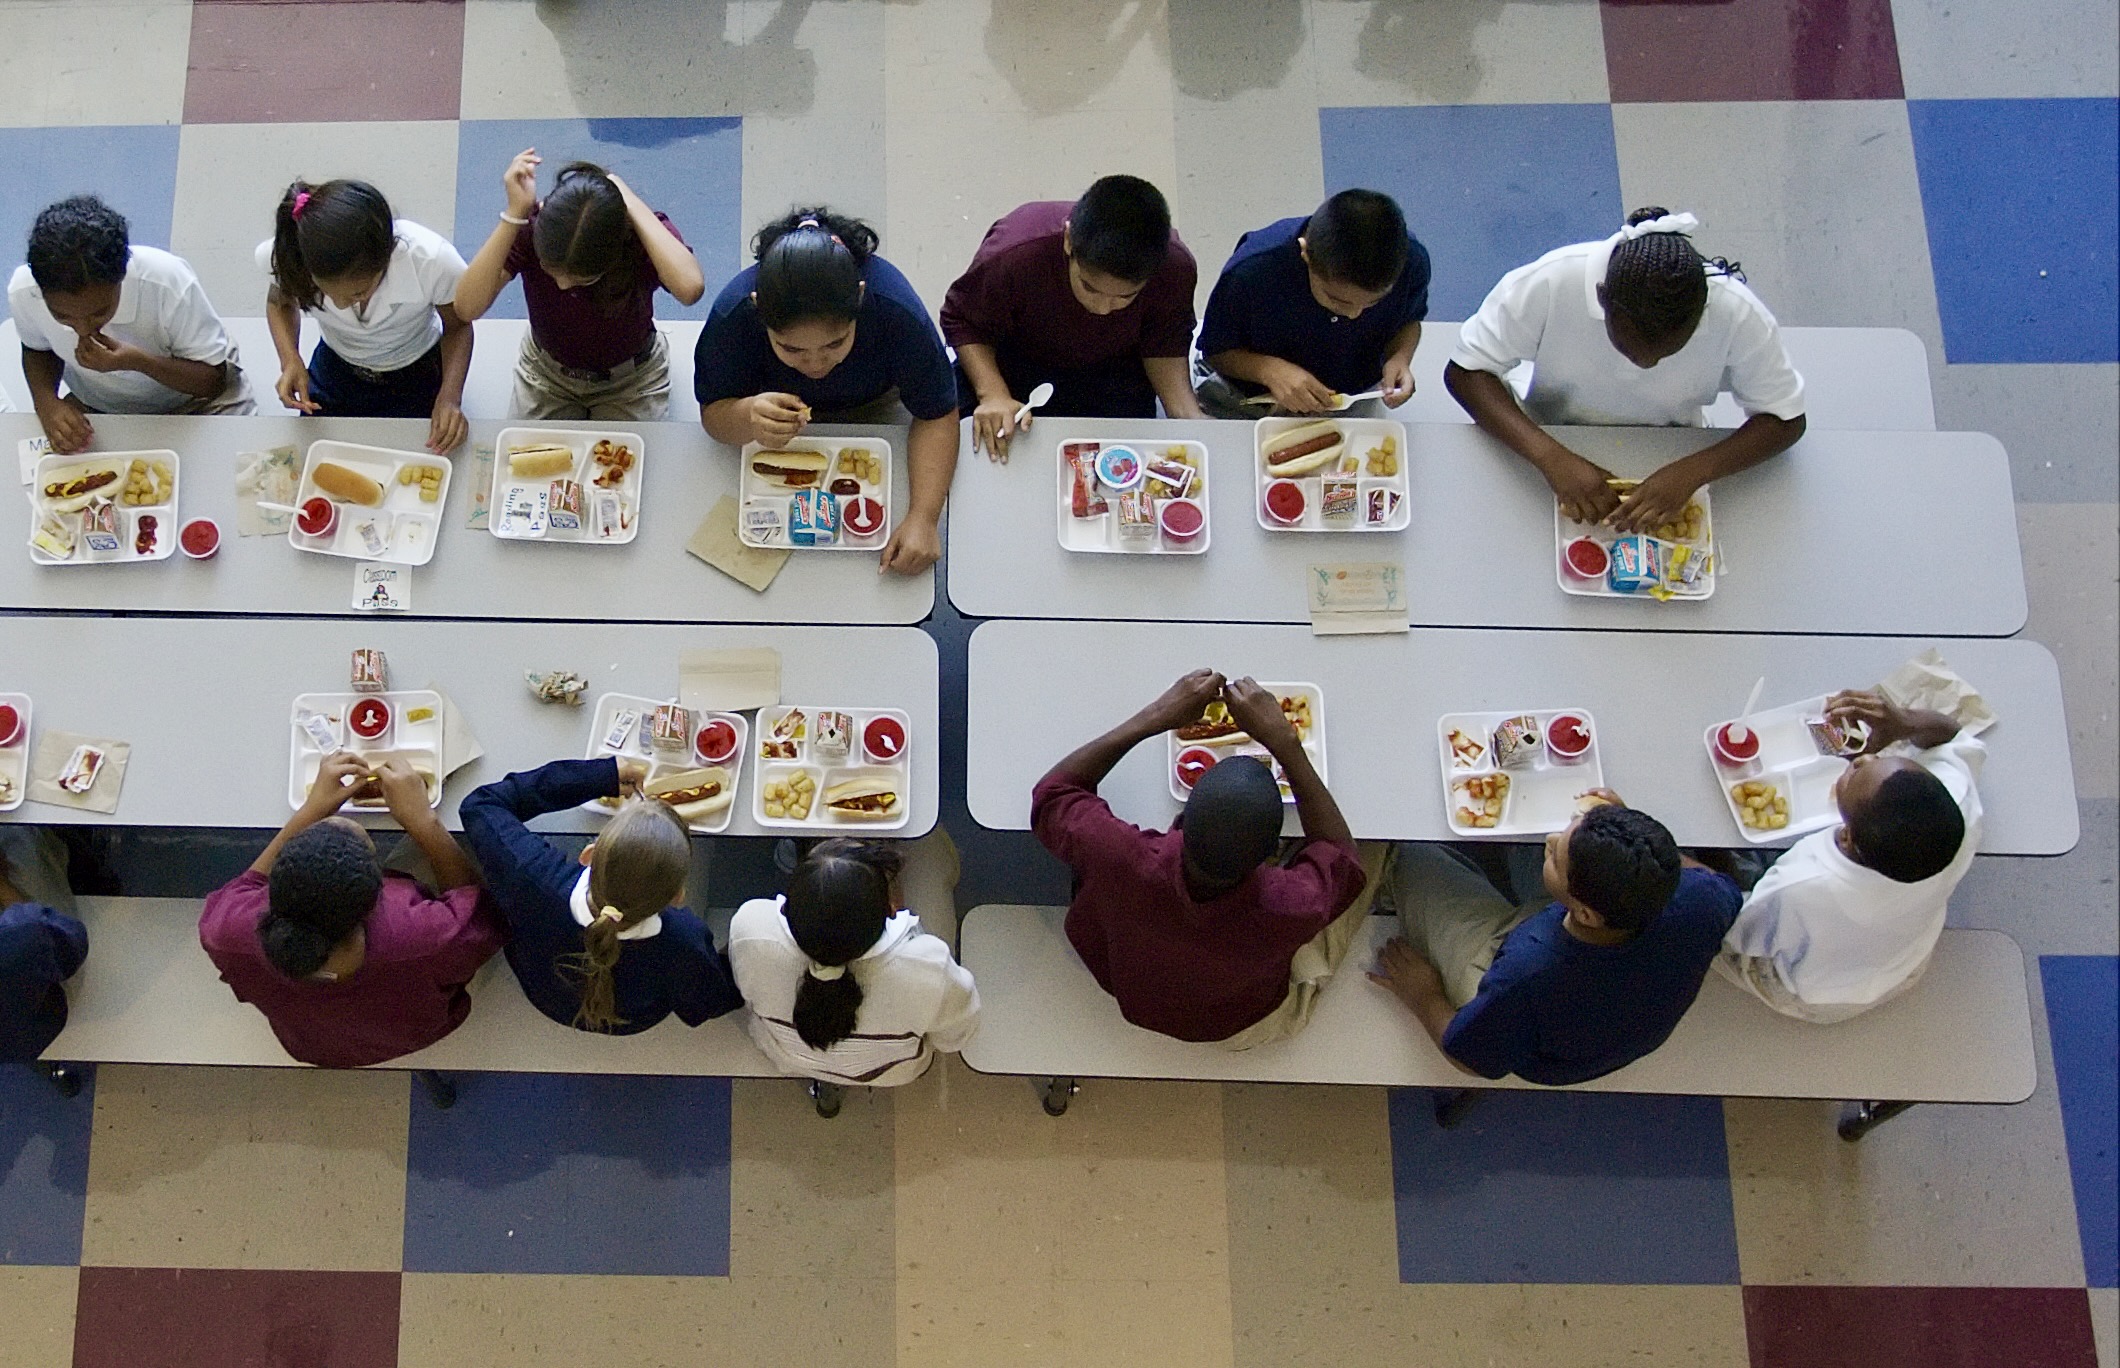 A ceiling shot looking down on a cafeteria table with children eating lunch off of cafeteria trays.